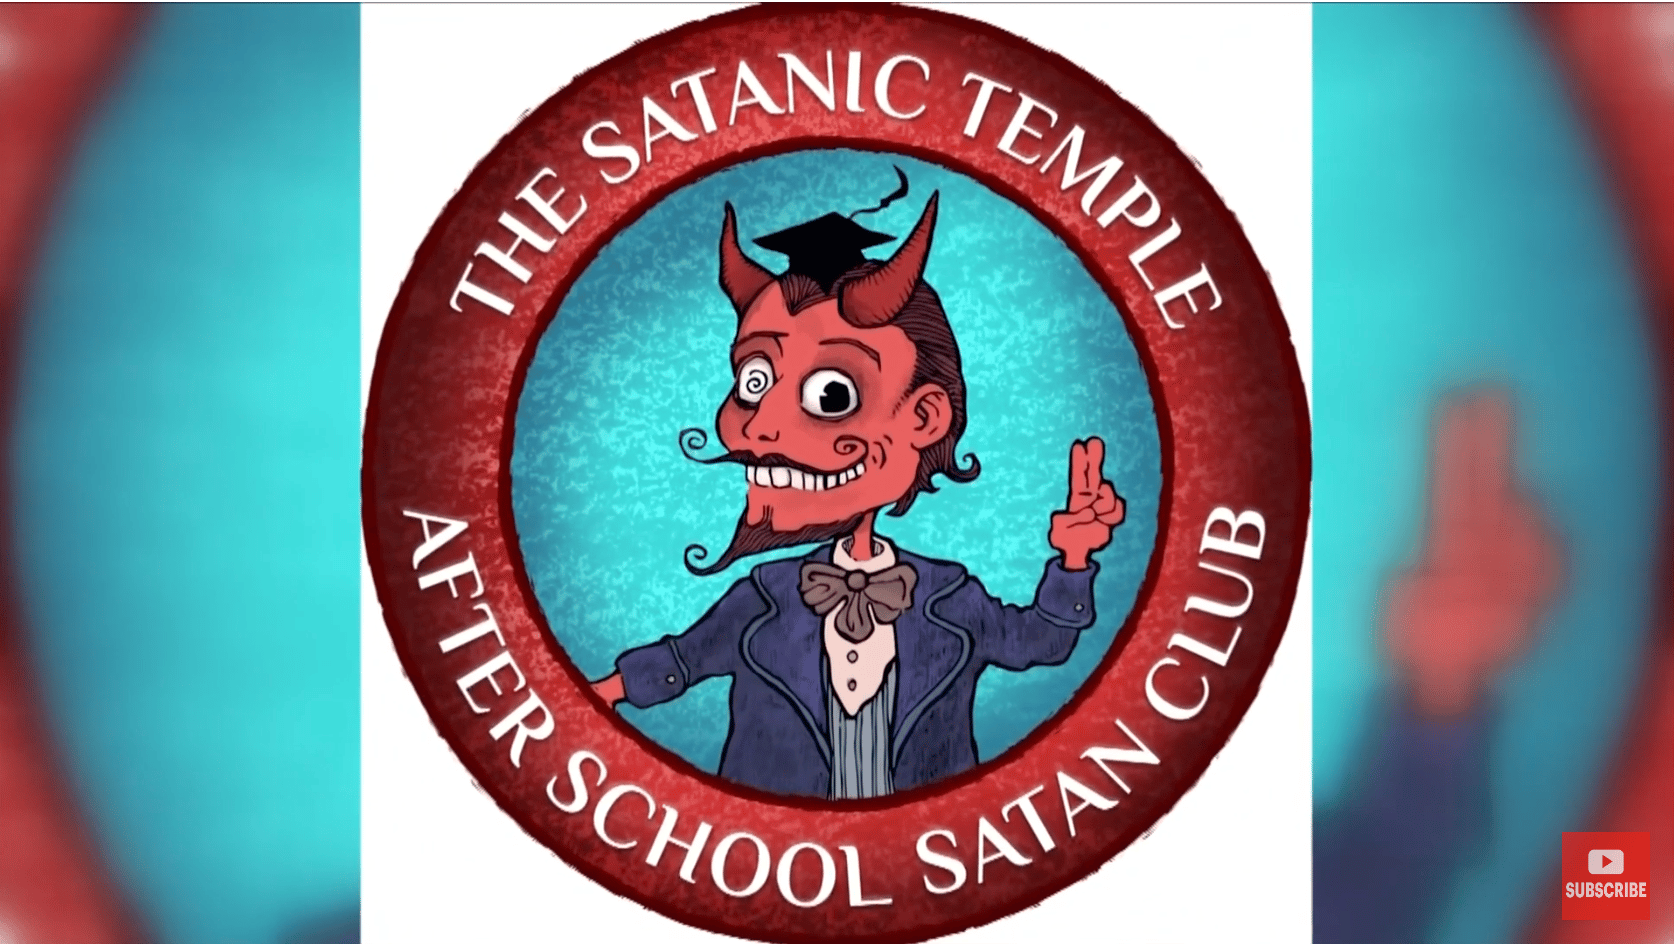 California Elementary School welcomes “After School Satan Club,” and not everyone is happy about it